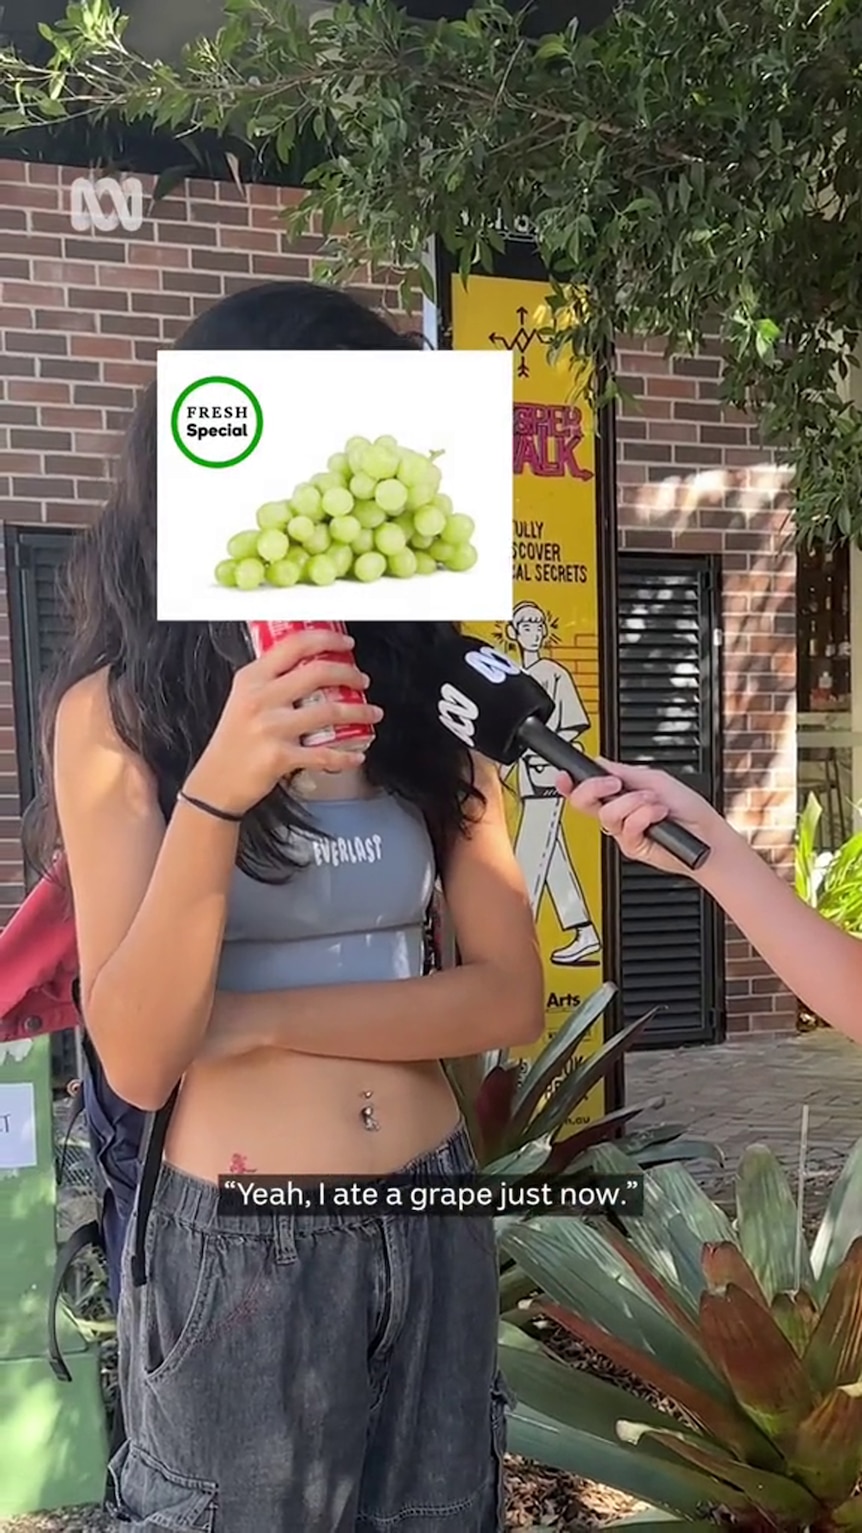 A young woman  in street clothes is being interviewed and she has her face concealed with a graphic showing a bunch of grapes